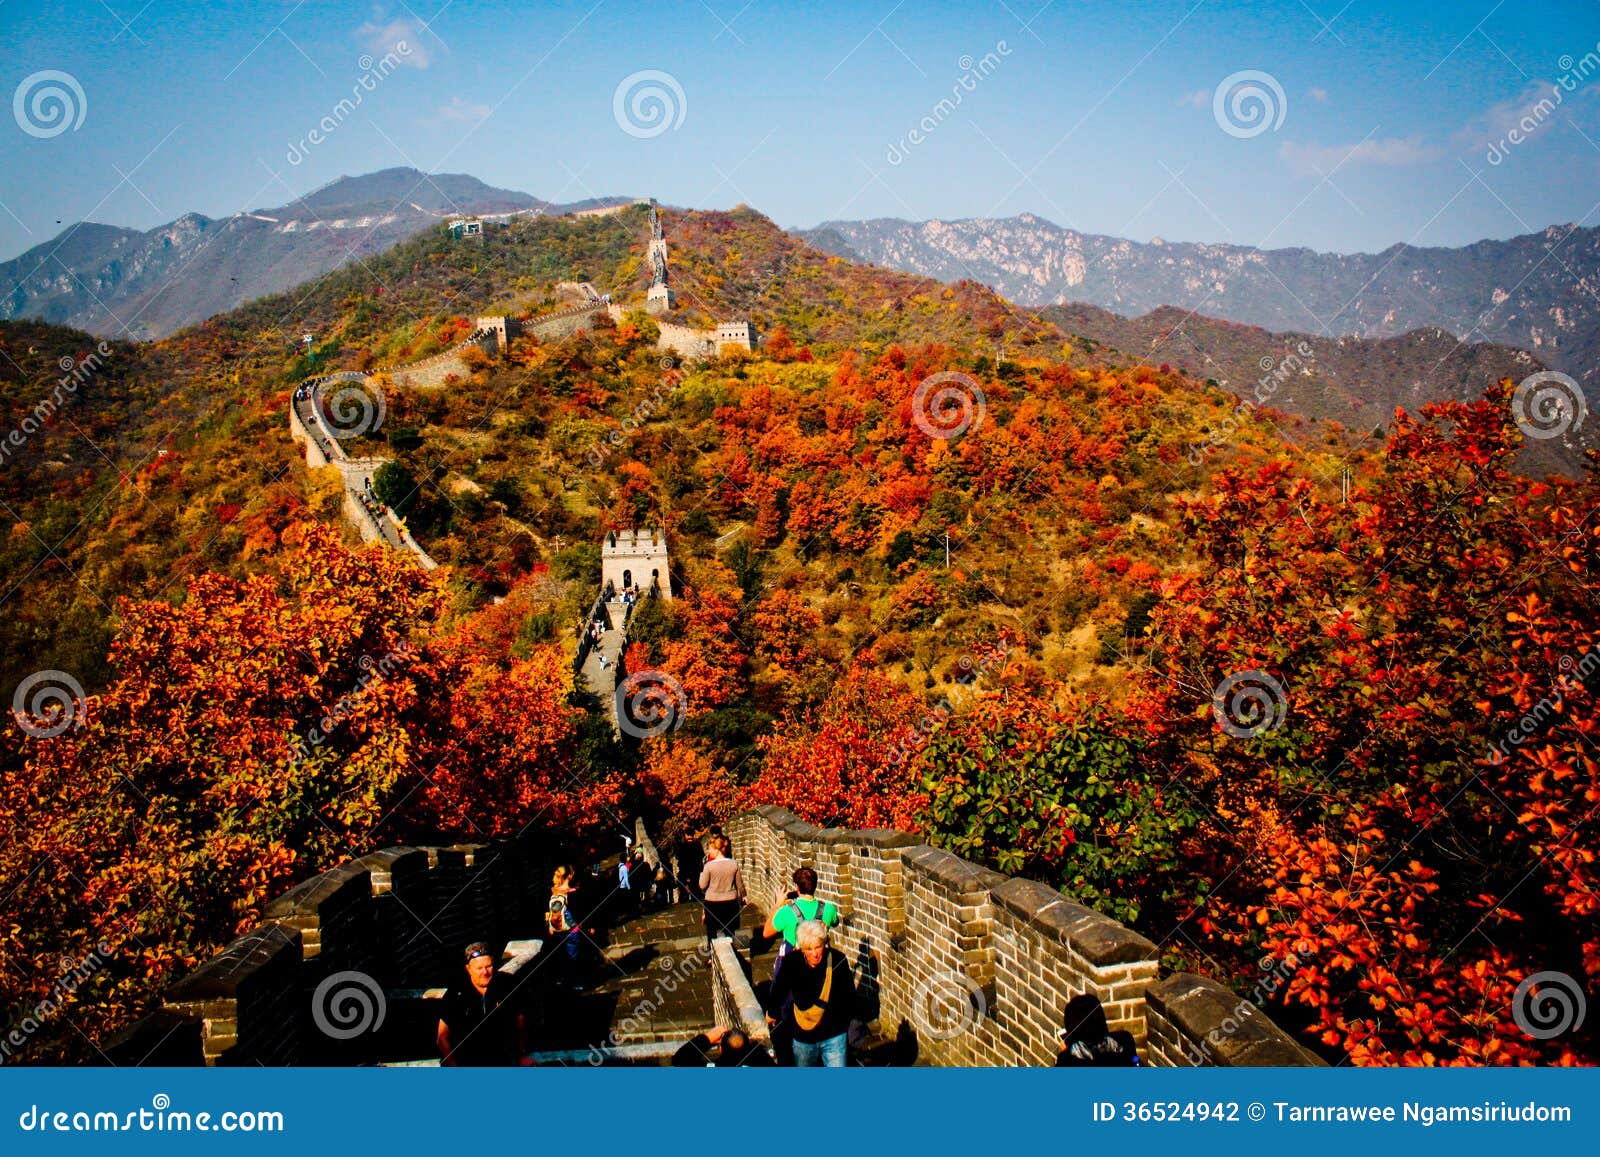 Great Wall Of China Editorial Photography Image Of Great